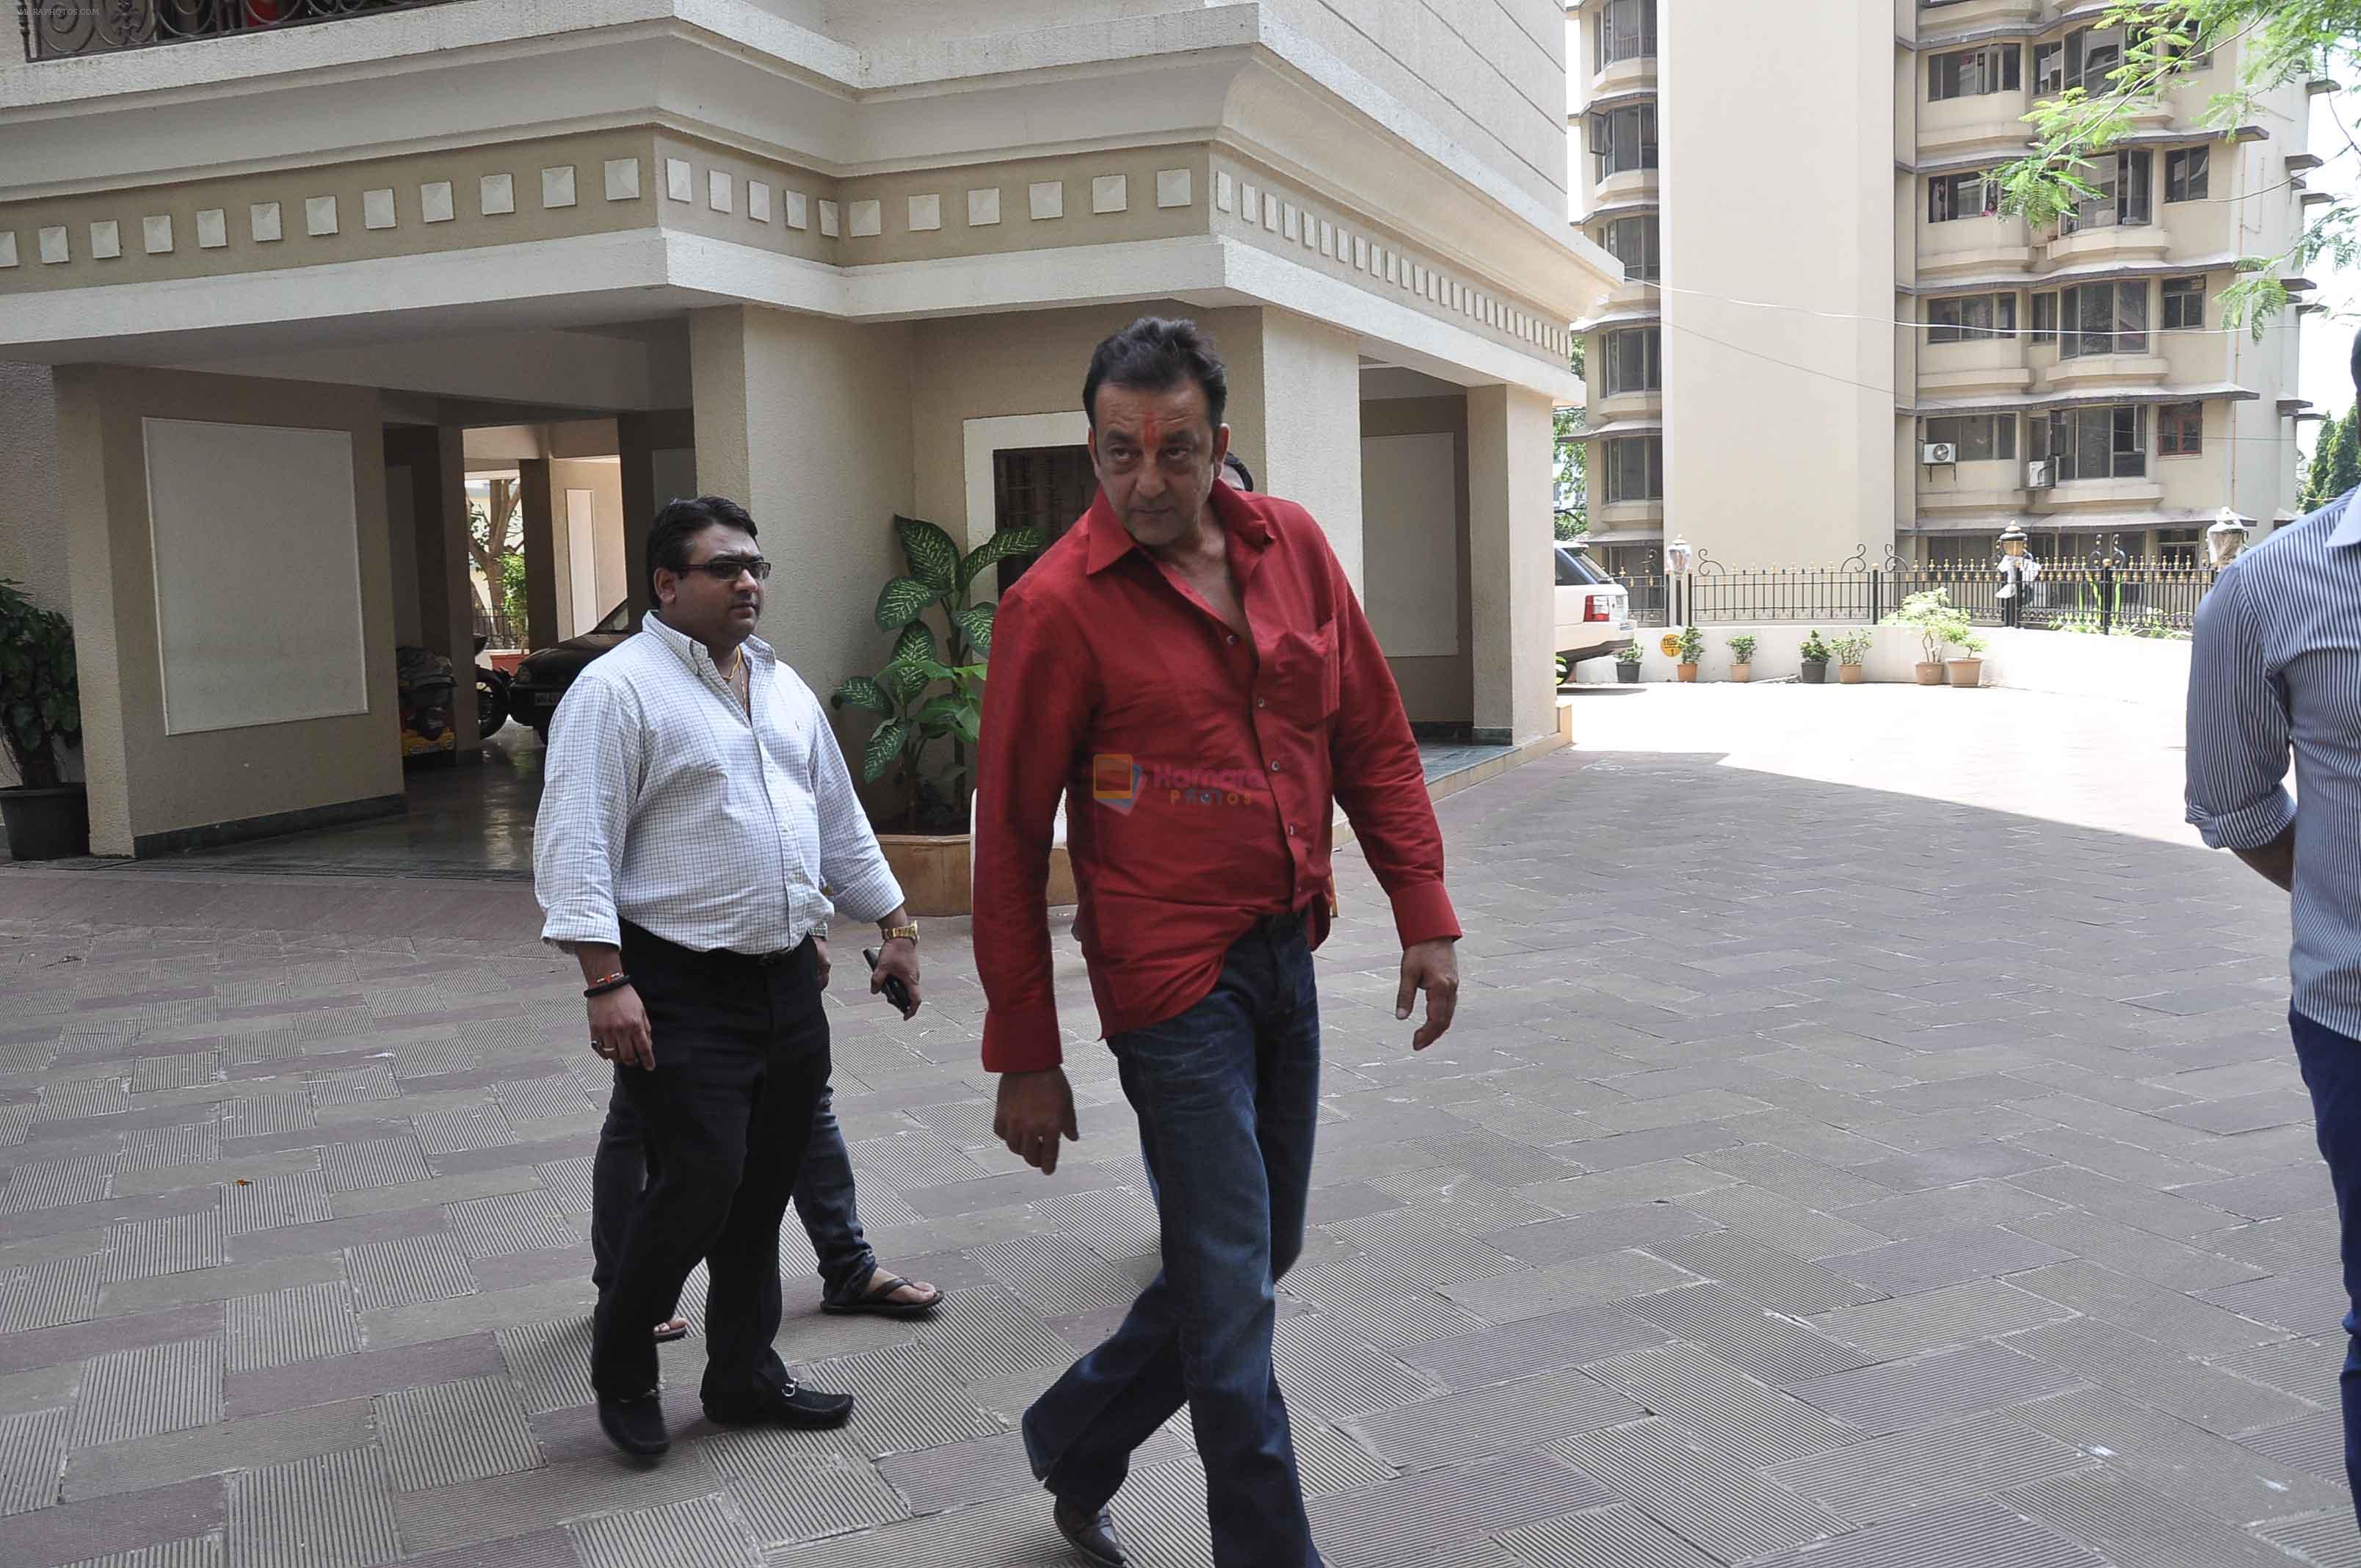 Sanjay dutt comes home on a 10 day health leave in Mumbai on 1st Oct 2013